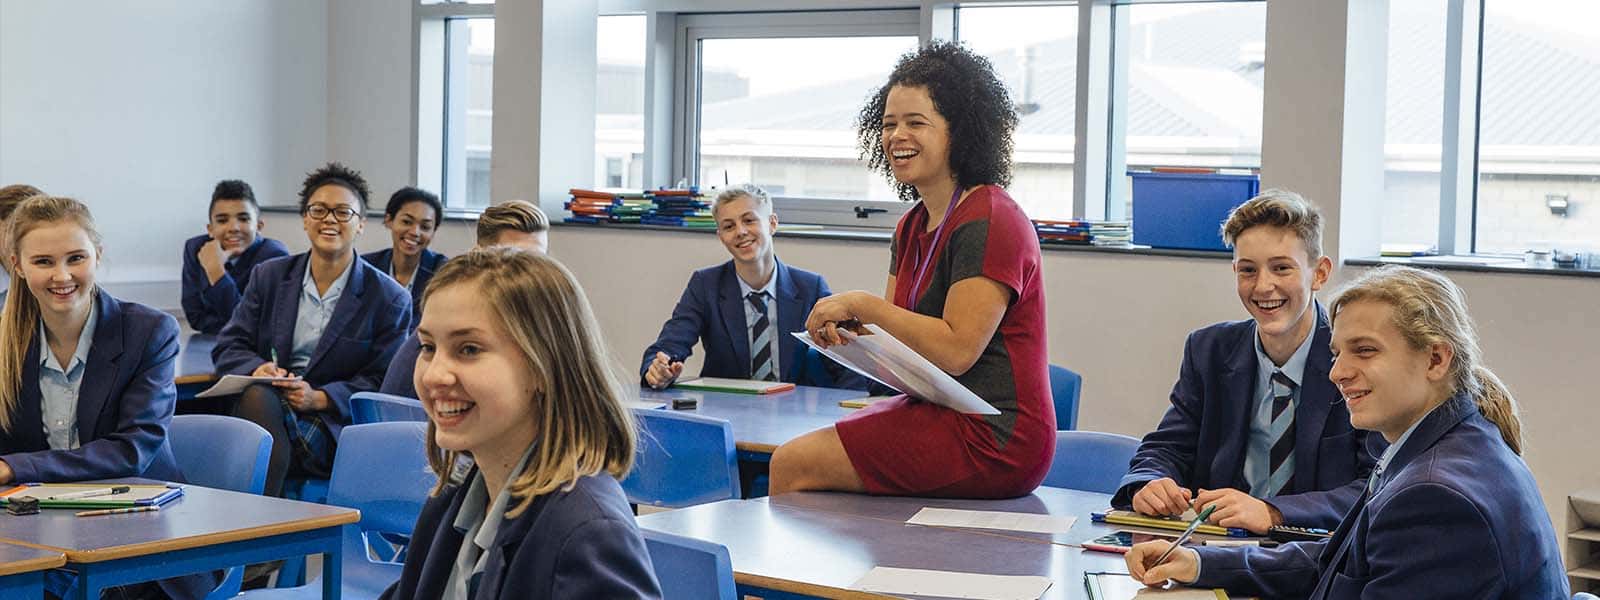 Teacher sitting on a desk laughing with pupils